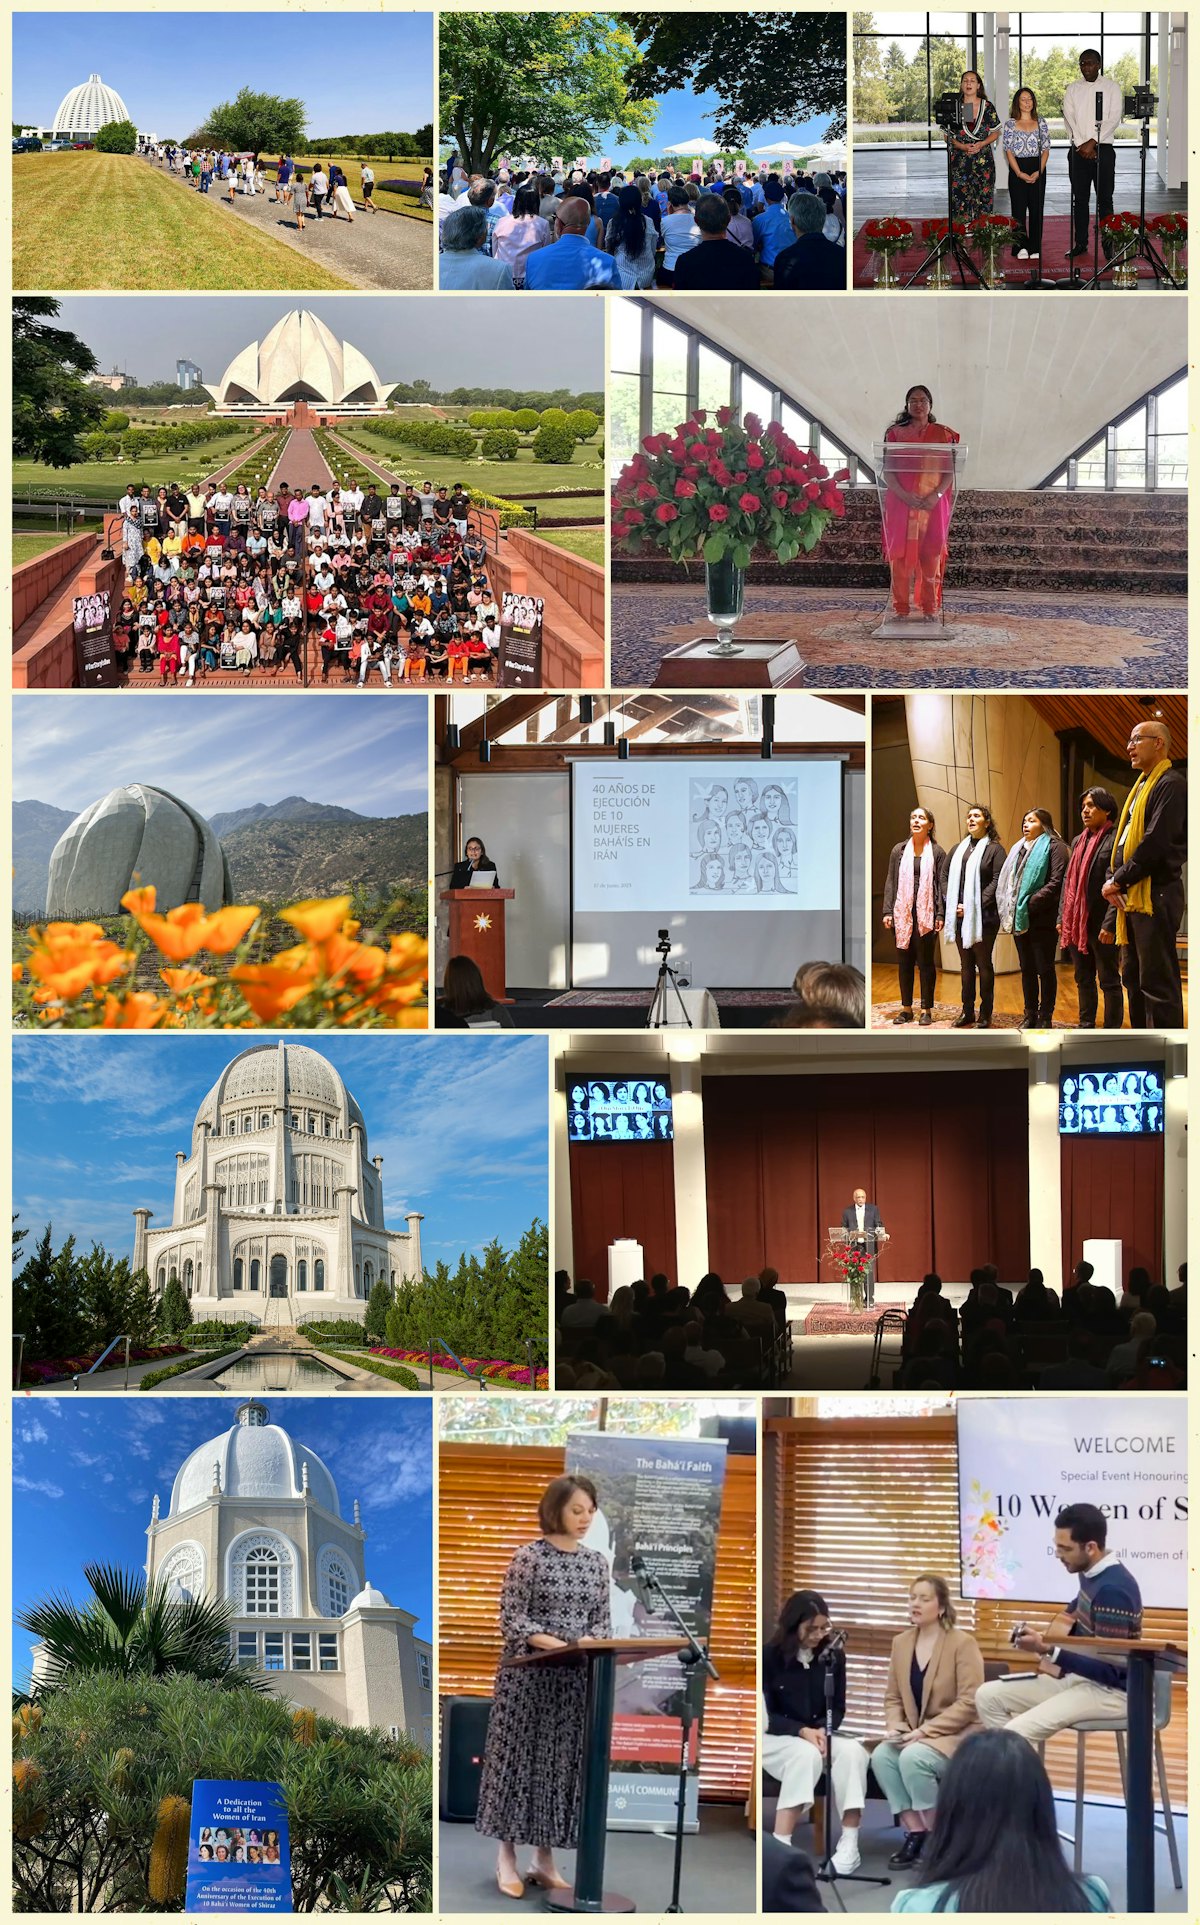 Commemorations were held at Bahá’í Houses of Worship in Sydney, Australia; Santiago, Chile; Frankfurt, Germany; New Delhi, India; and Wilmette, the United States. These events included remarks from government officials and parliamentarians, prominent individuals as well as artistic presentations, music, and stories shared by relatives of the 10 women.